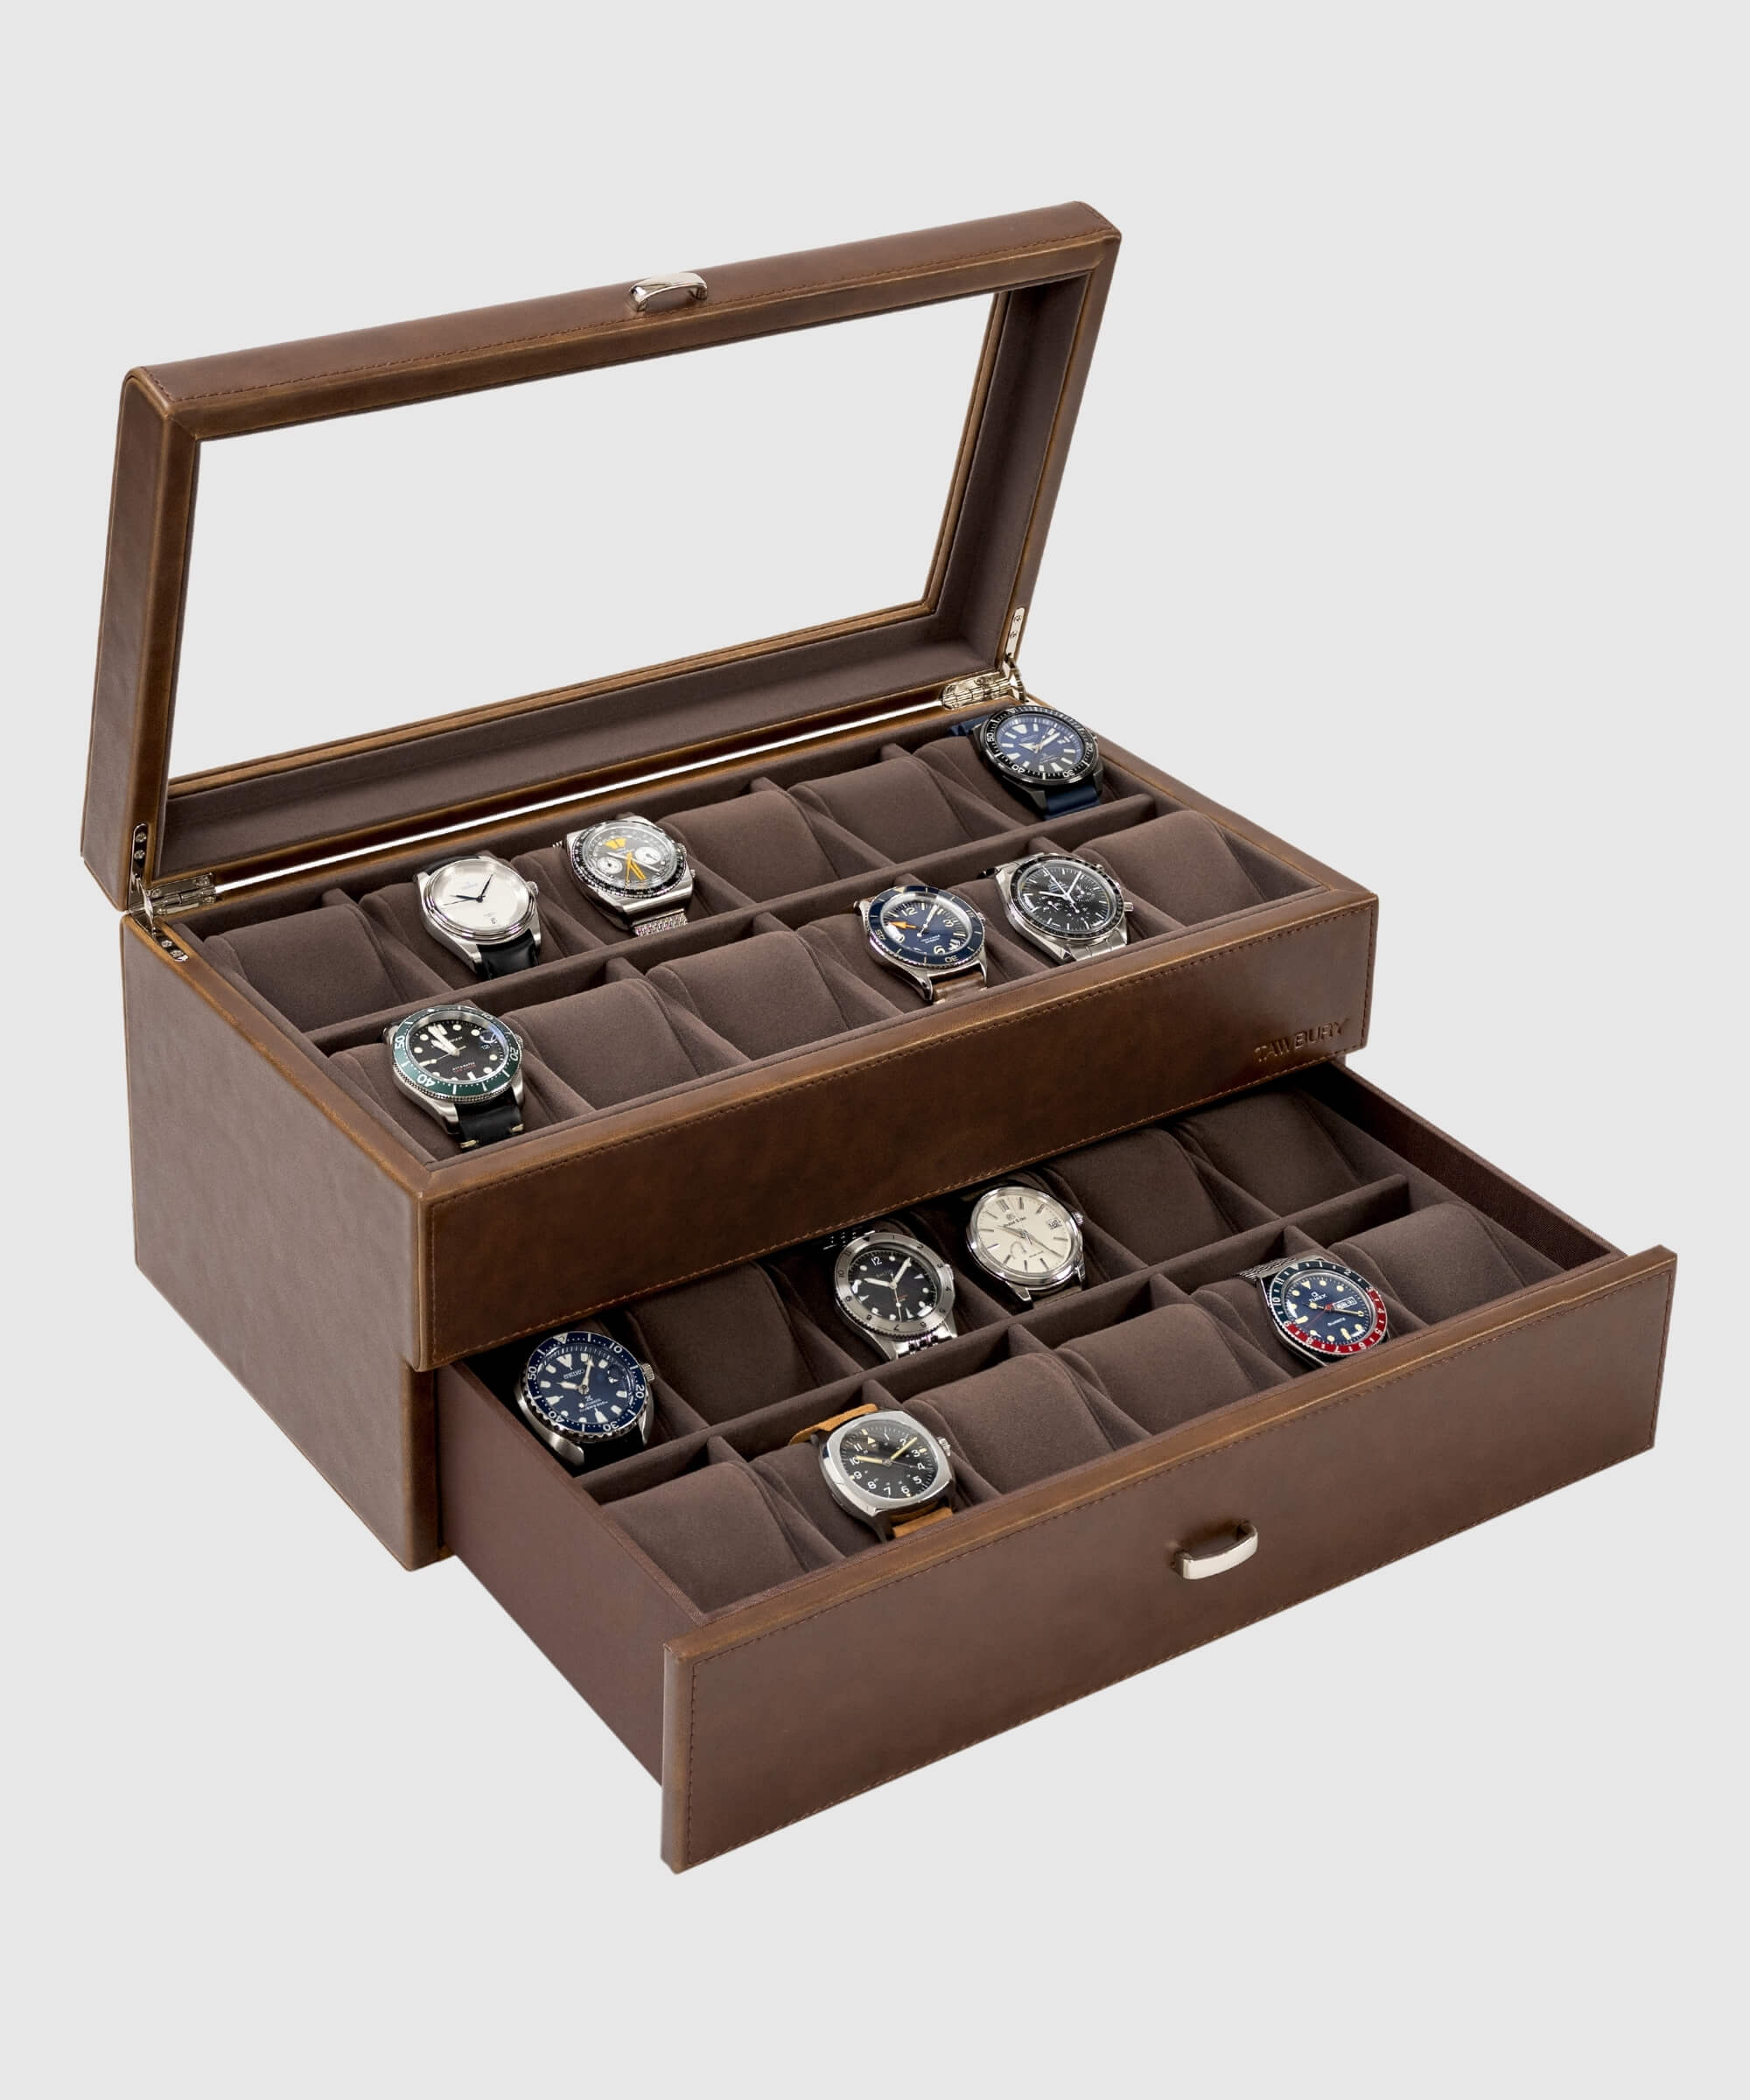 The TAWBURY Bayswater 24 Slot Watch Box with Drawer - Brown is a sleek brown watch box designed to organise and display several watches. It is perfect for watch enthusiasts looking to protect their precious timepieces.